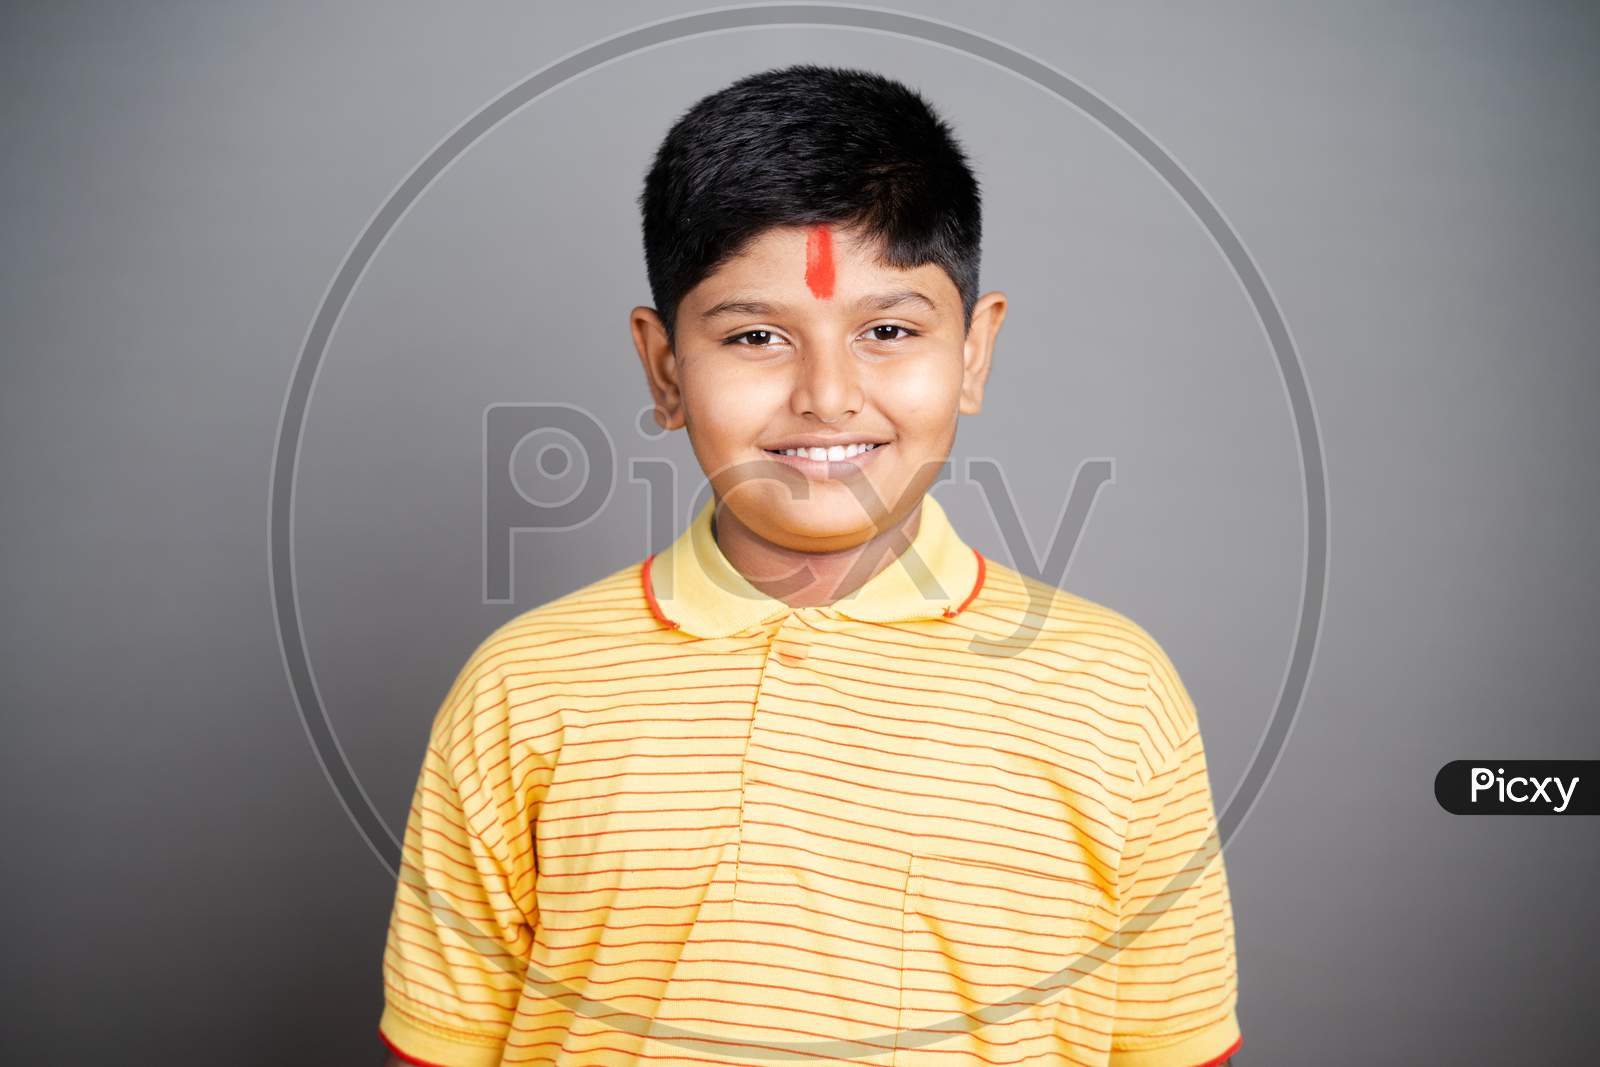 Happy Hindu kid with kumkum Bindi or Tilak on forehead by looking at camera on studio background - concept of smiling and positive joyful expression.